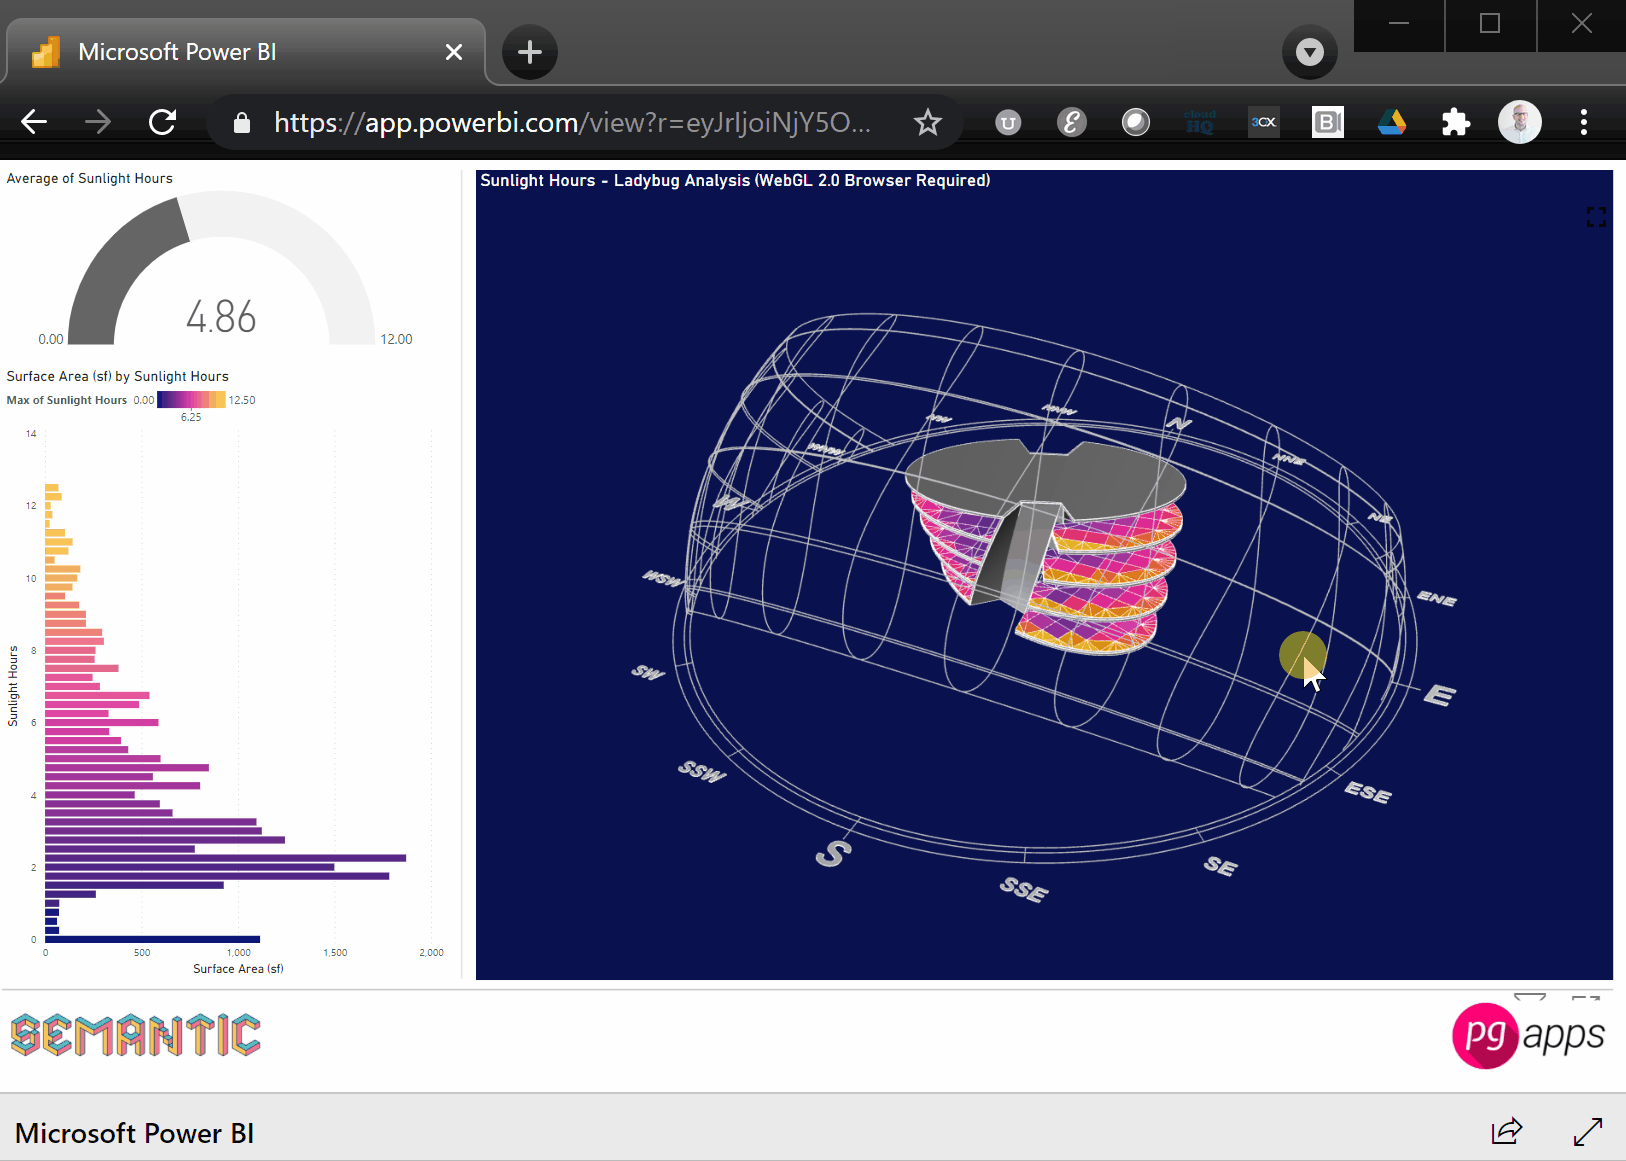 Users can create interactive dashboards in Power BI that link 3D Rhino models with other data sources. This example shows solar analysis data from Ladybug in Power BI.